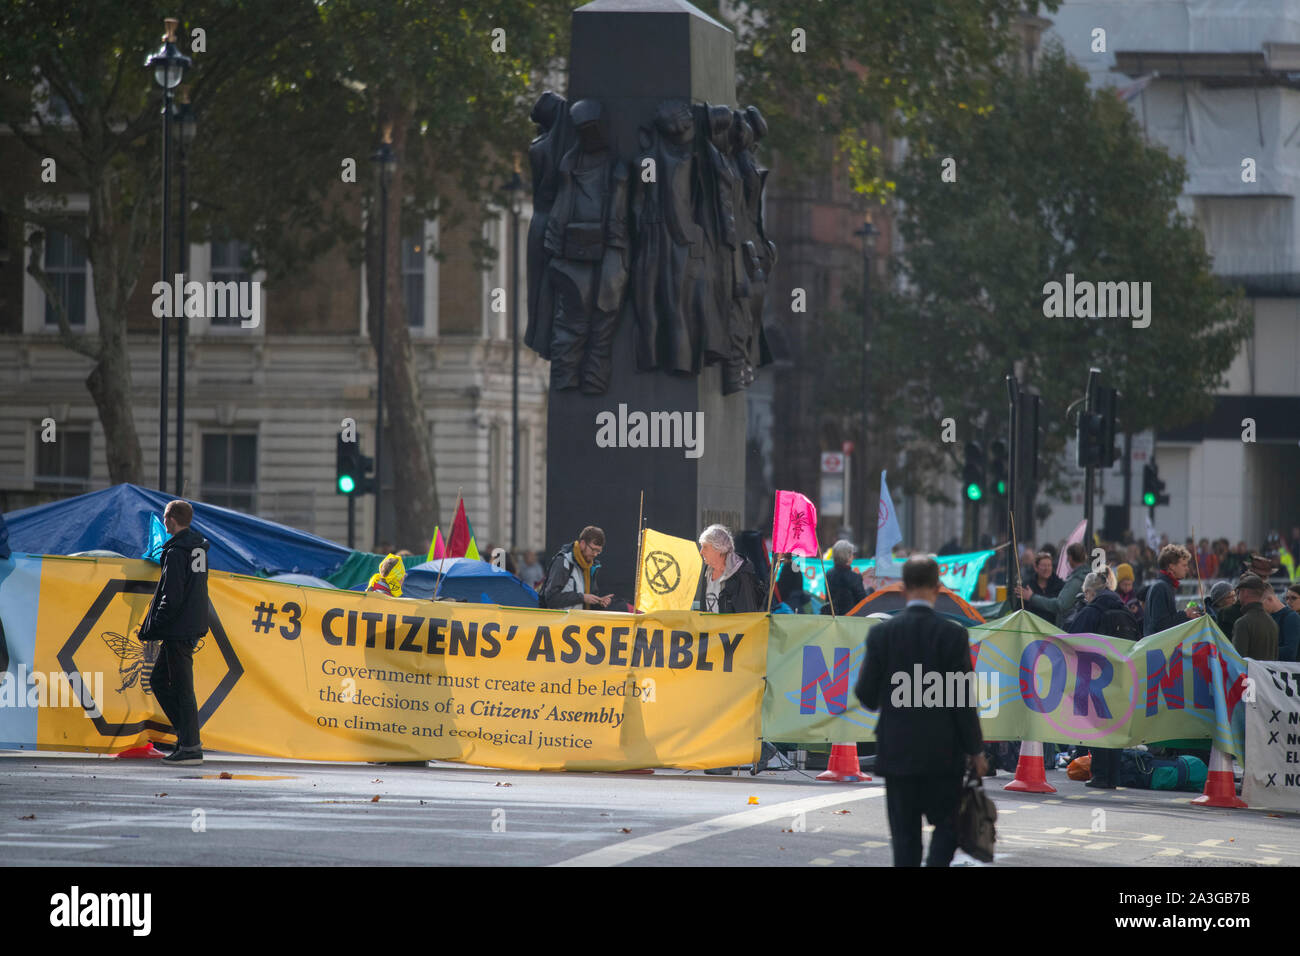 Westminster, London, UK. 8th October 2019. Extinction Rebellion activists block roads around Westminster in a second day of climate-change demonstrations. Whitehall is closed as demonstrators assemble close to the Downing Street entrance. Credit: Malcolm Park/Alamy Live News. Stock Photo